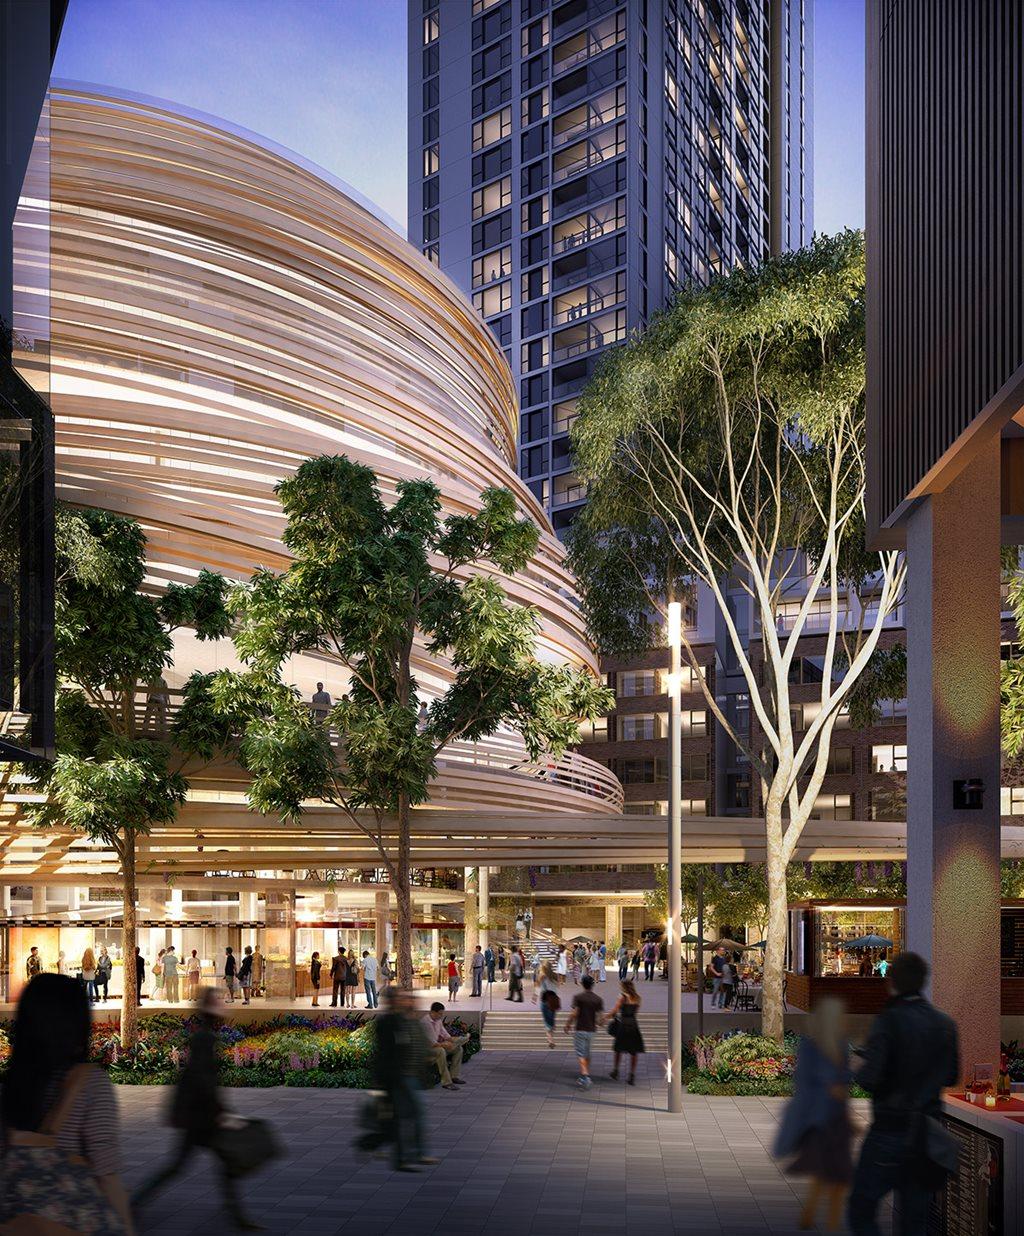 Renderings of Kuma’s design show a spiralling, coil-like wooden facade somewhat reminiscent of a Slinky toy / Lendlease